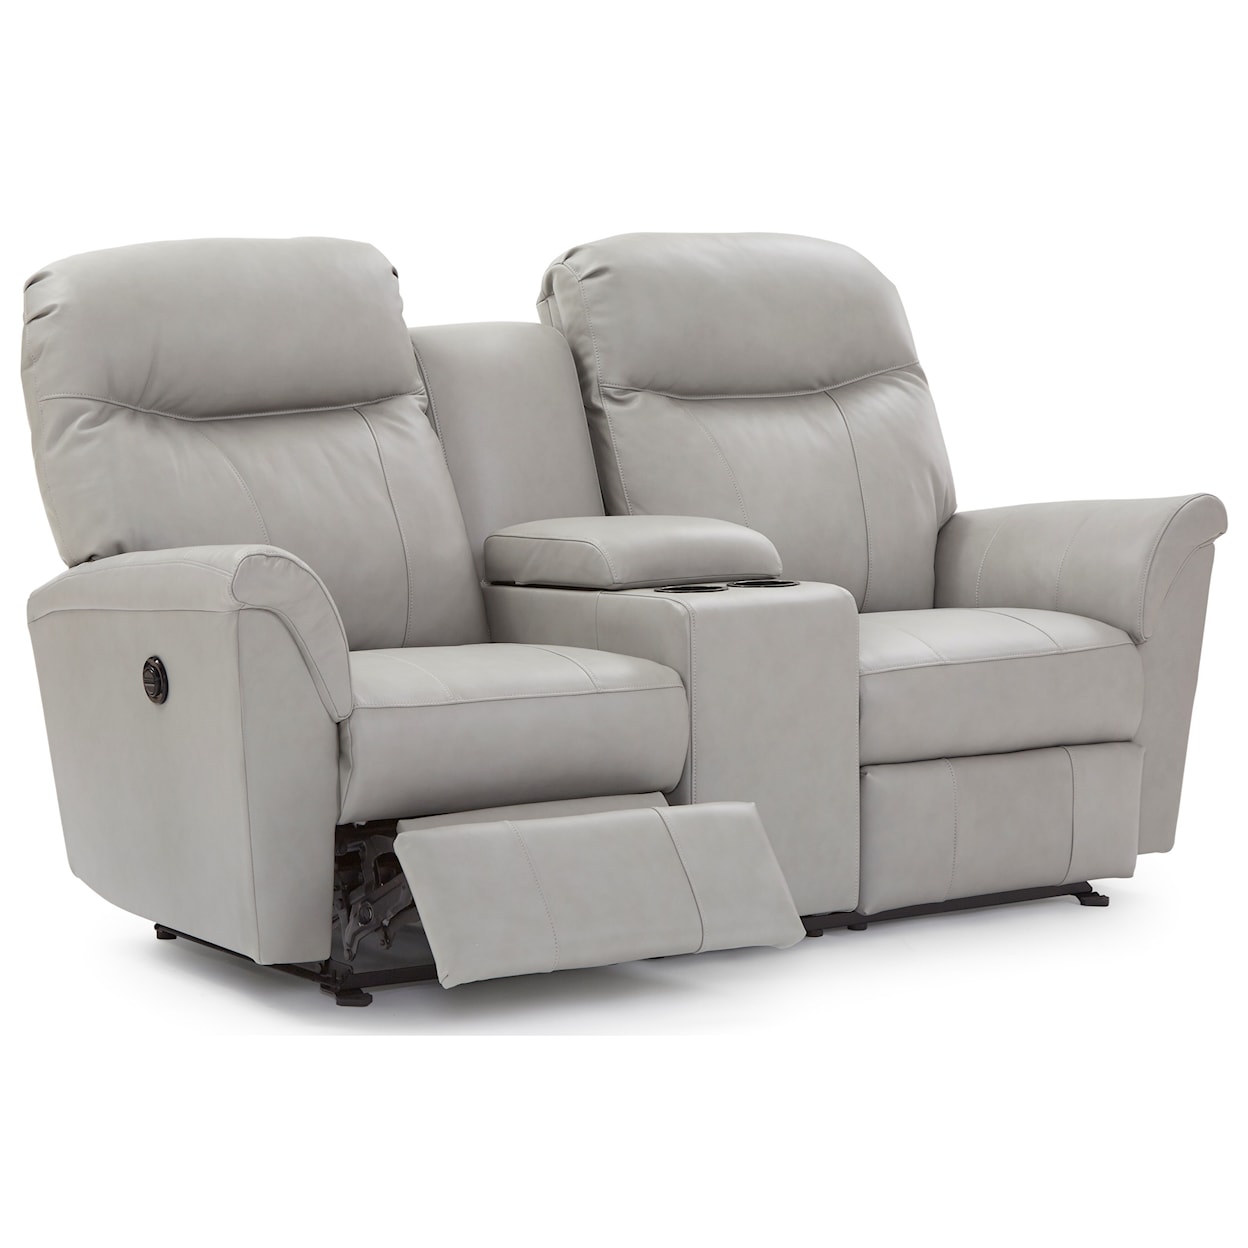 Best Home Furnishings Caitlin Reclining Space Saver Console Loveseat